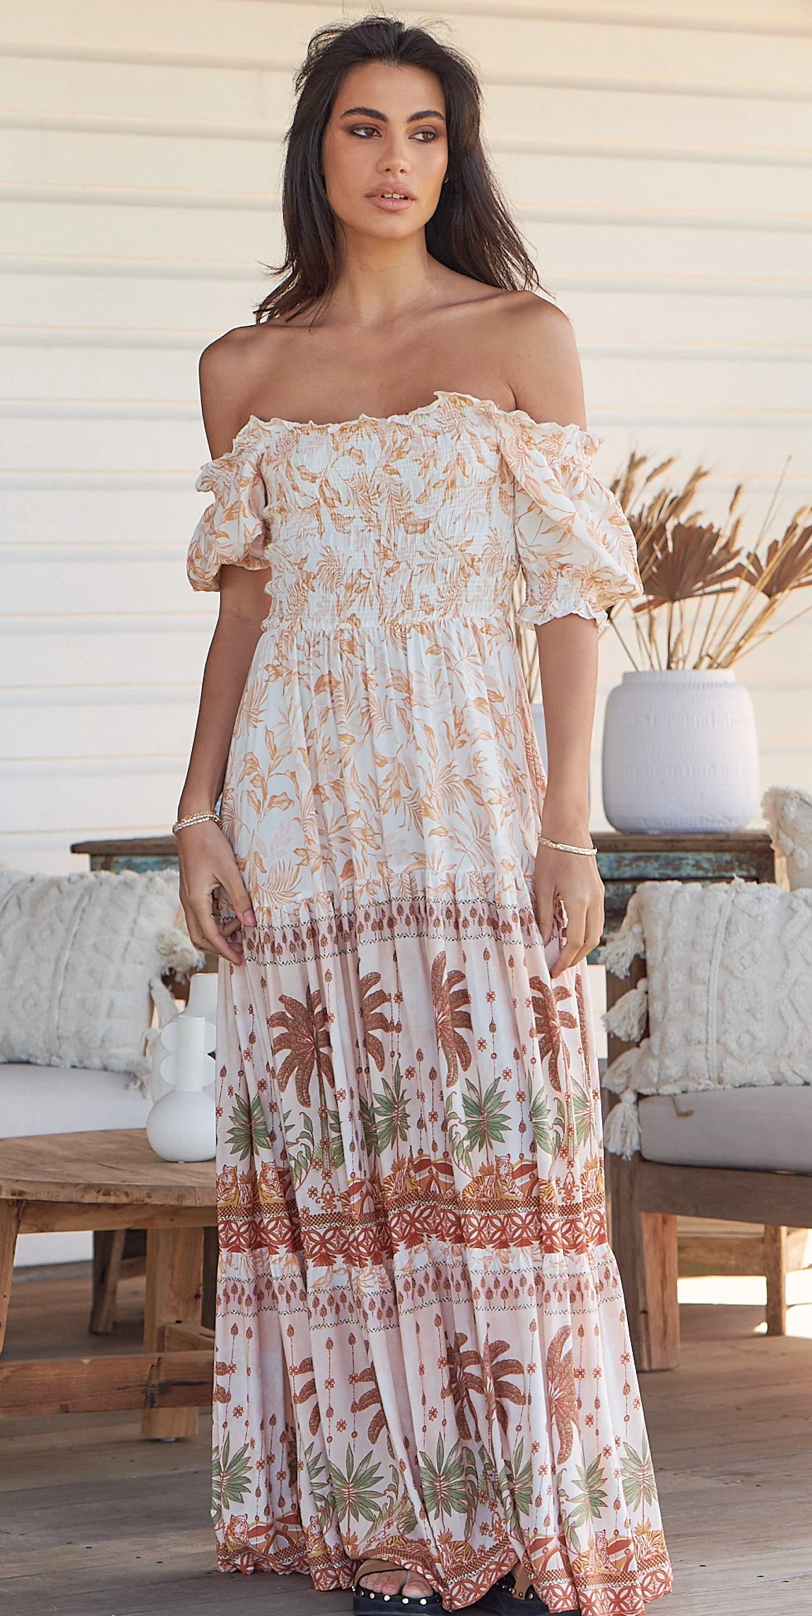 Unleash your inner flower child with the Claudette Maxi Dress in Yasmina! This flowy and floral off-the-shoulder dress is perfect for a bohemian-inspired look. The elastic cuffs offer a comfortable fit while the maxi length adds a touch of elegance. Perfect for any summer event. (No flower crown necessary.)